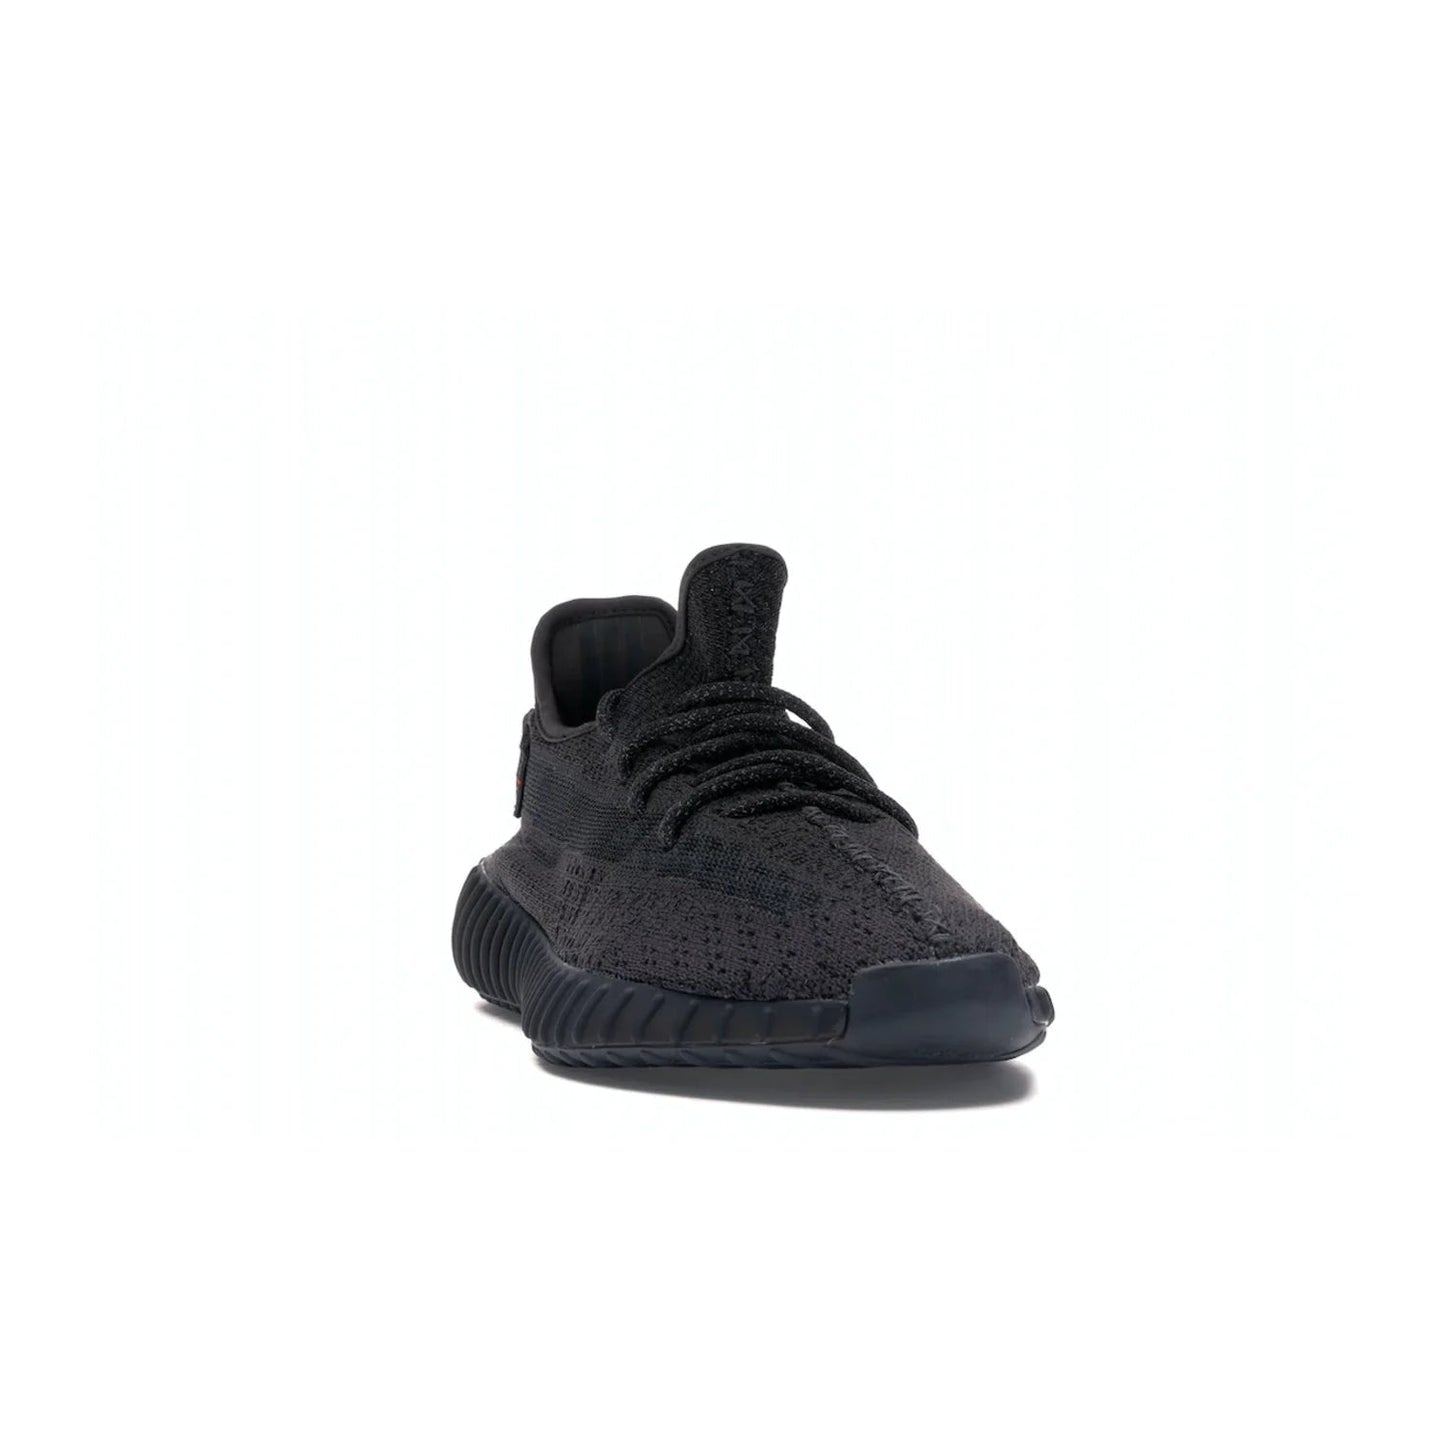 adidas Yeezy Boost 350 V2 Static Black (Reflective) - Image 8 - Only at www.BallersClubKickz.com - Make a statement with the adidas Yeezy Boost 350 V2 Static Black Reflective. All-black upper, reflective accents, midsole, and sole combine for a stylish look. High quality materials. June 2019 release. Add to your collection today.